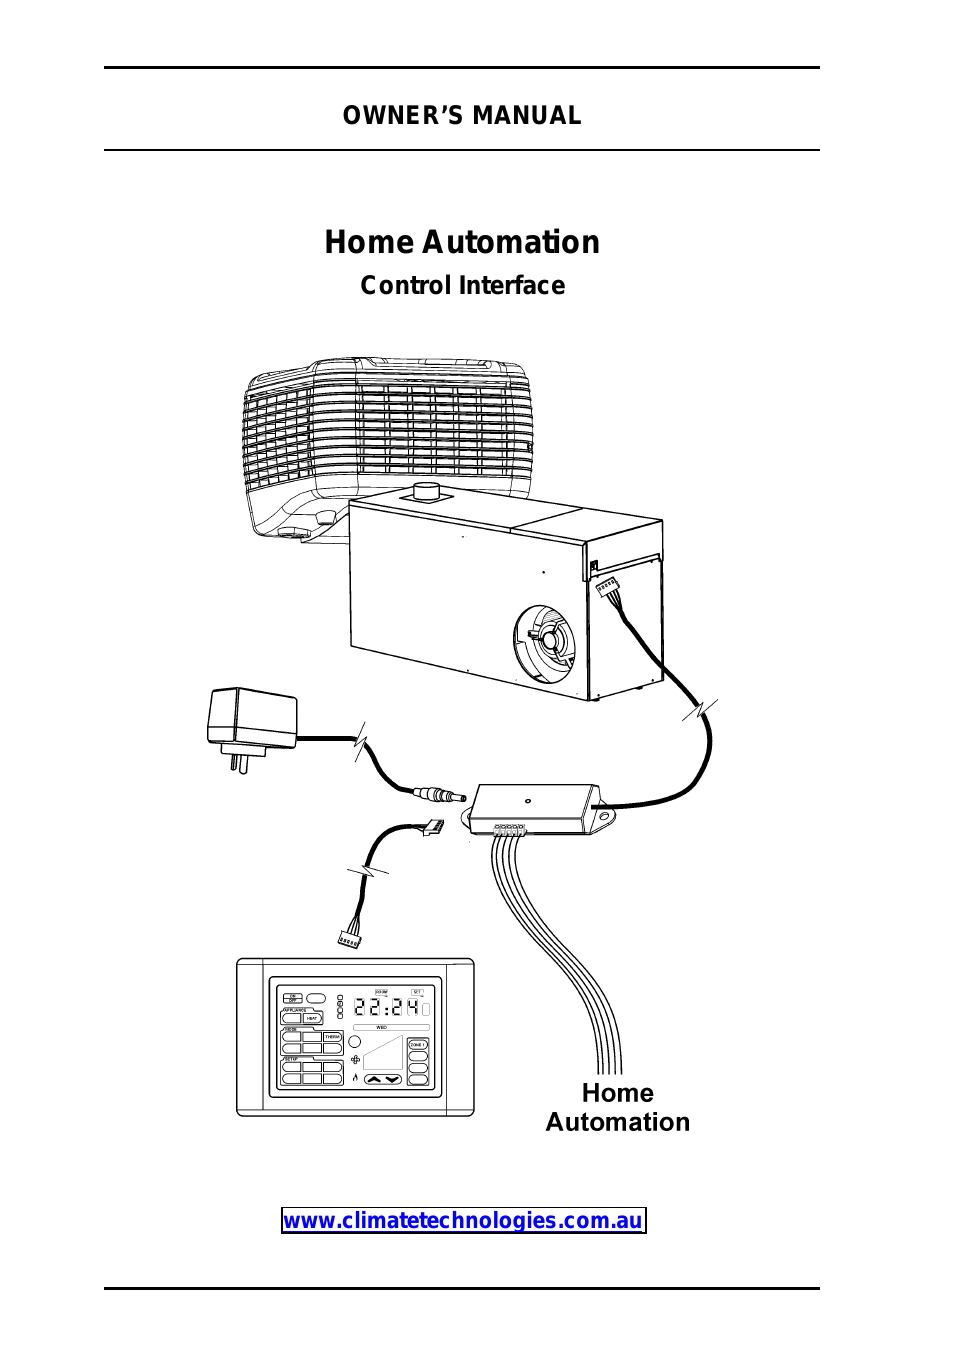 Home Automation (Touchpad Only)